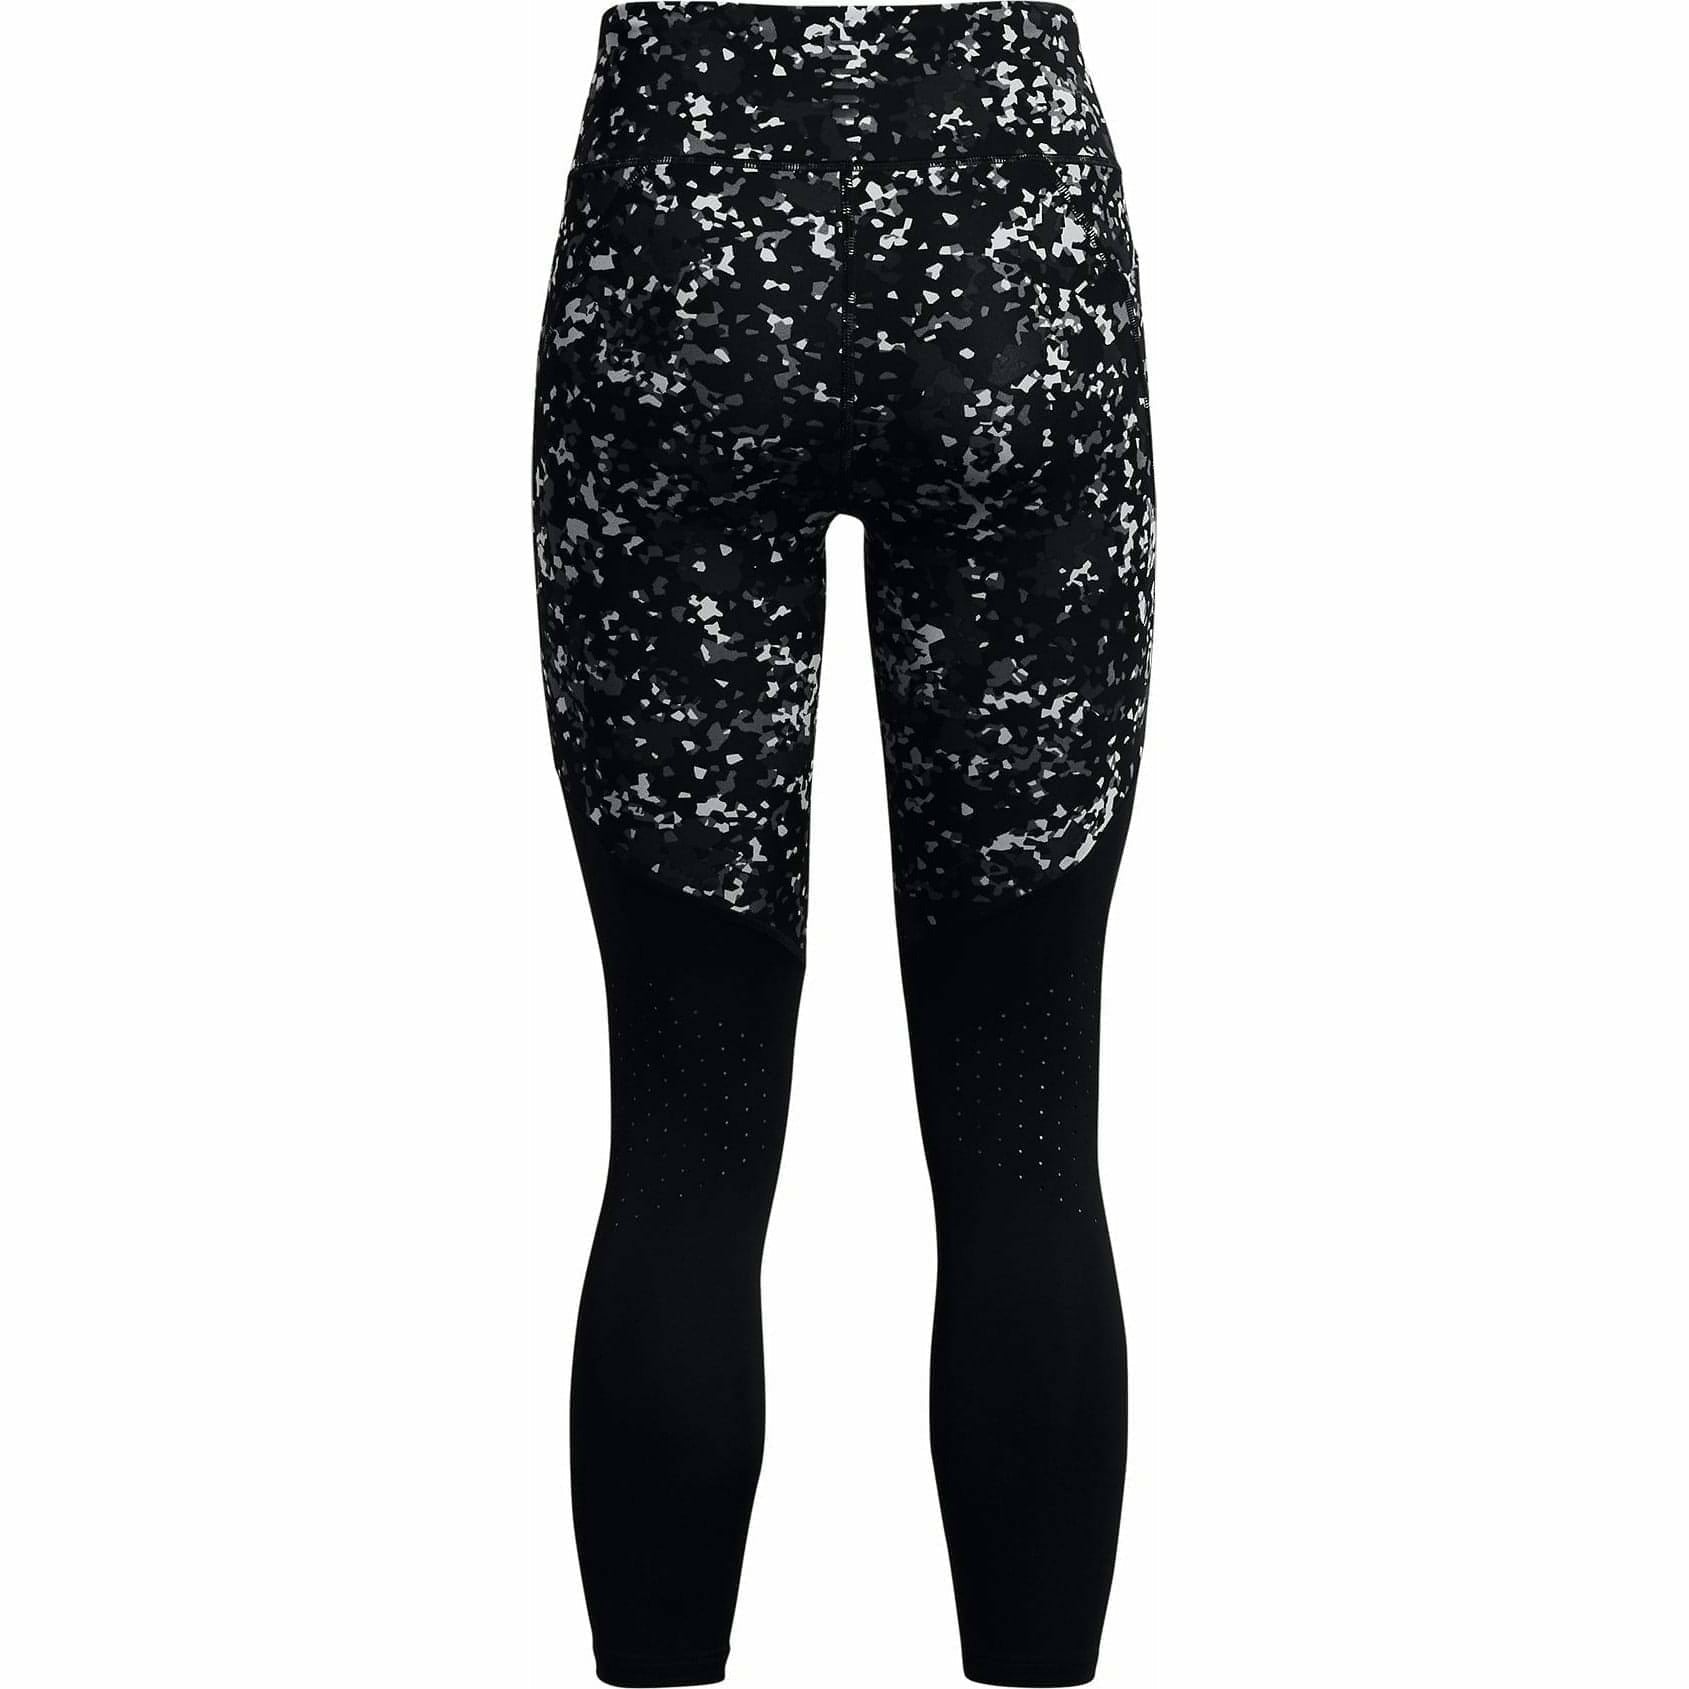 Under Armour Fly Fast 3.0 Printed Womens 7/8 Running Tights - Black - Start Fitness